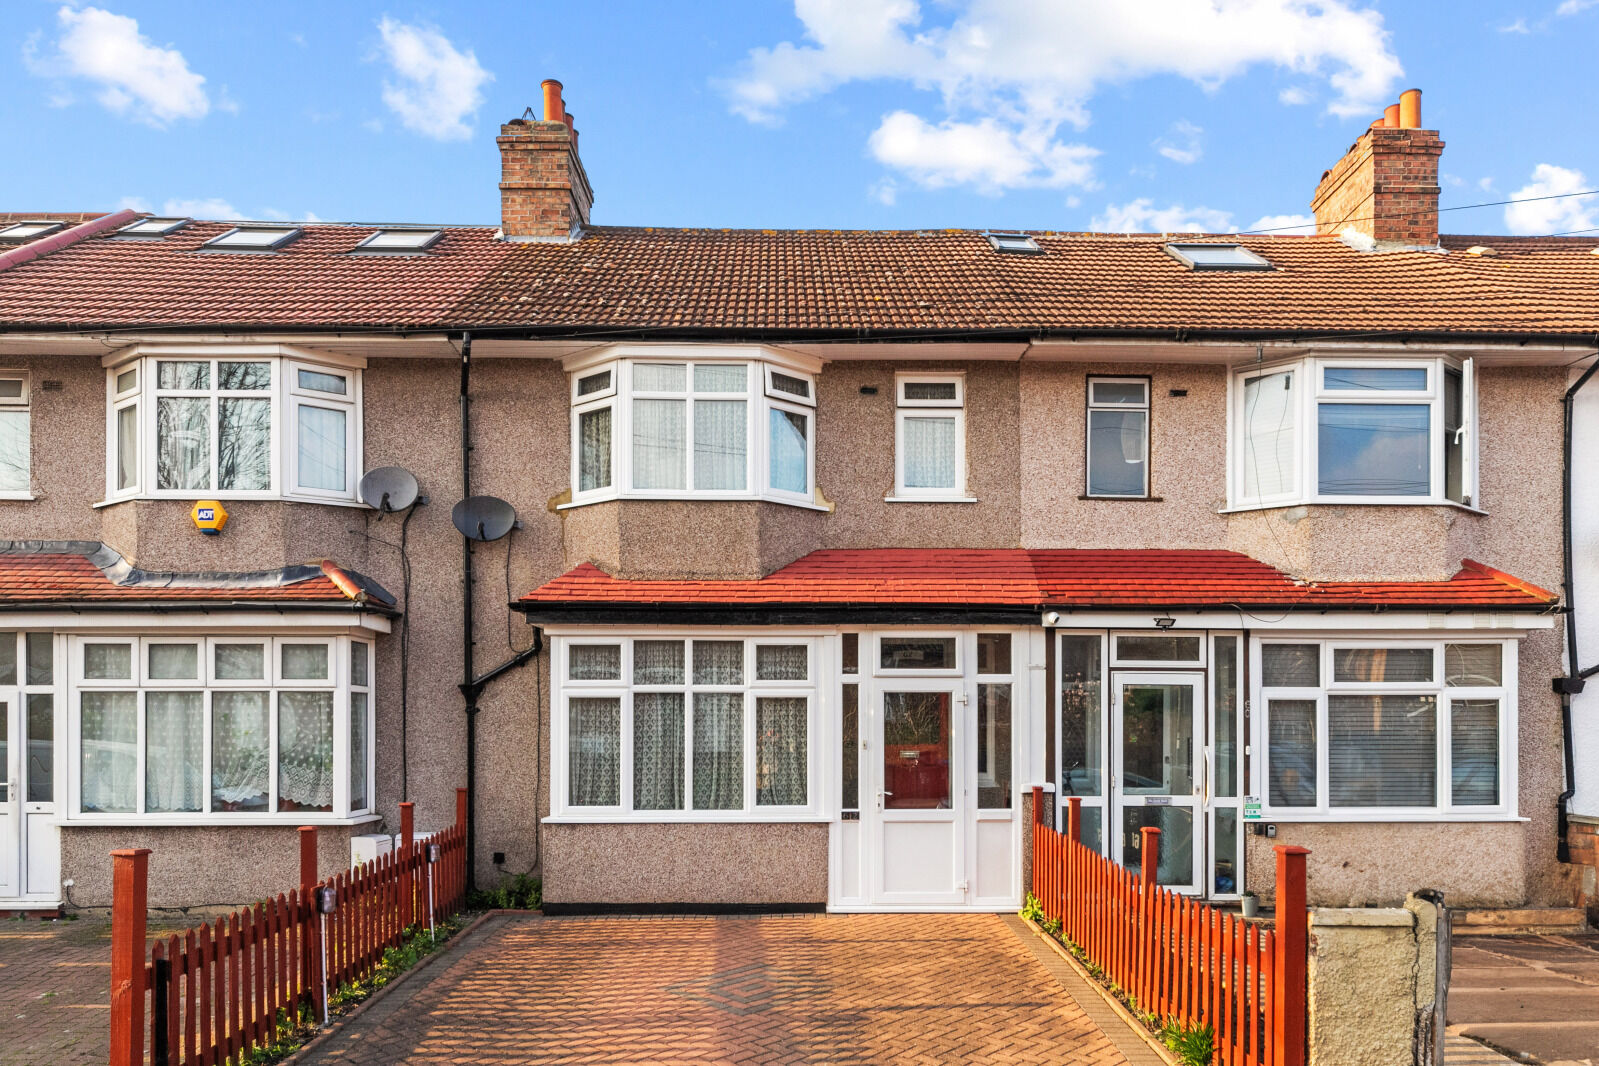 3 bedroom mid terraced house for sale Bond Road, Mitcham, CR4, main image